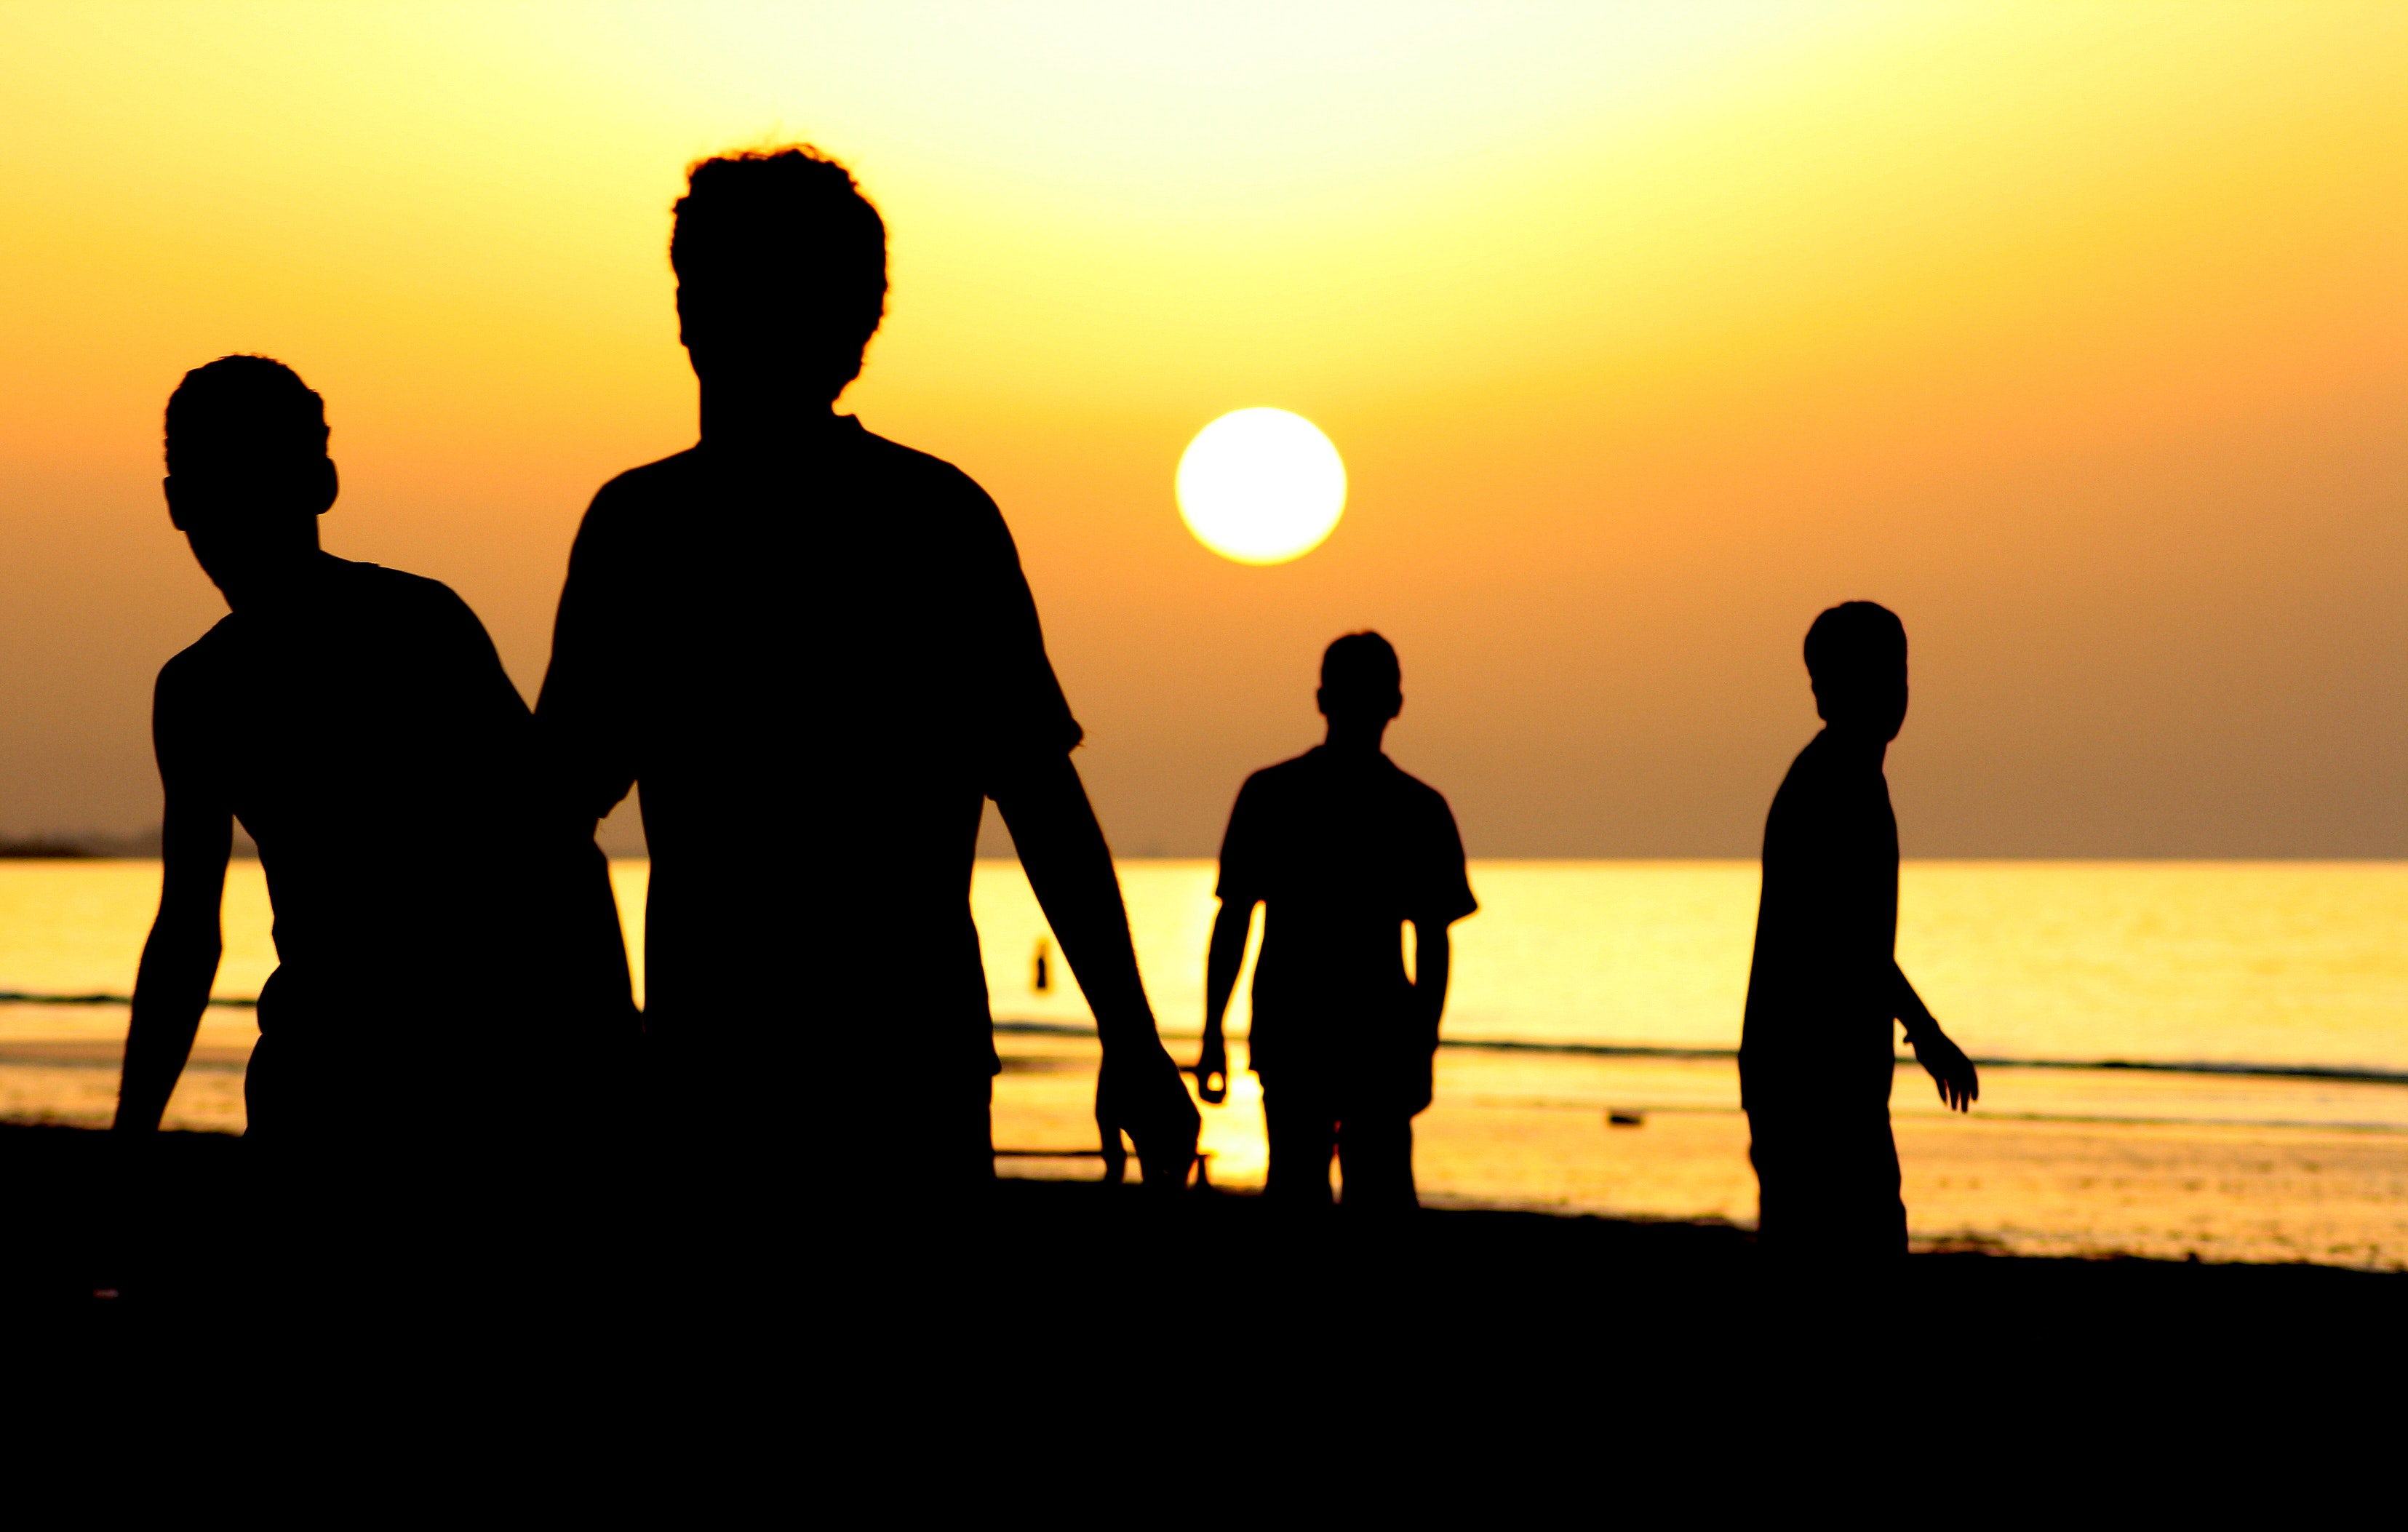 Silhouette of 4 people near ocean during sunset photo